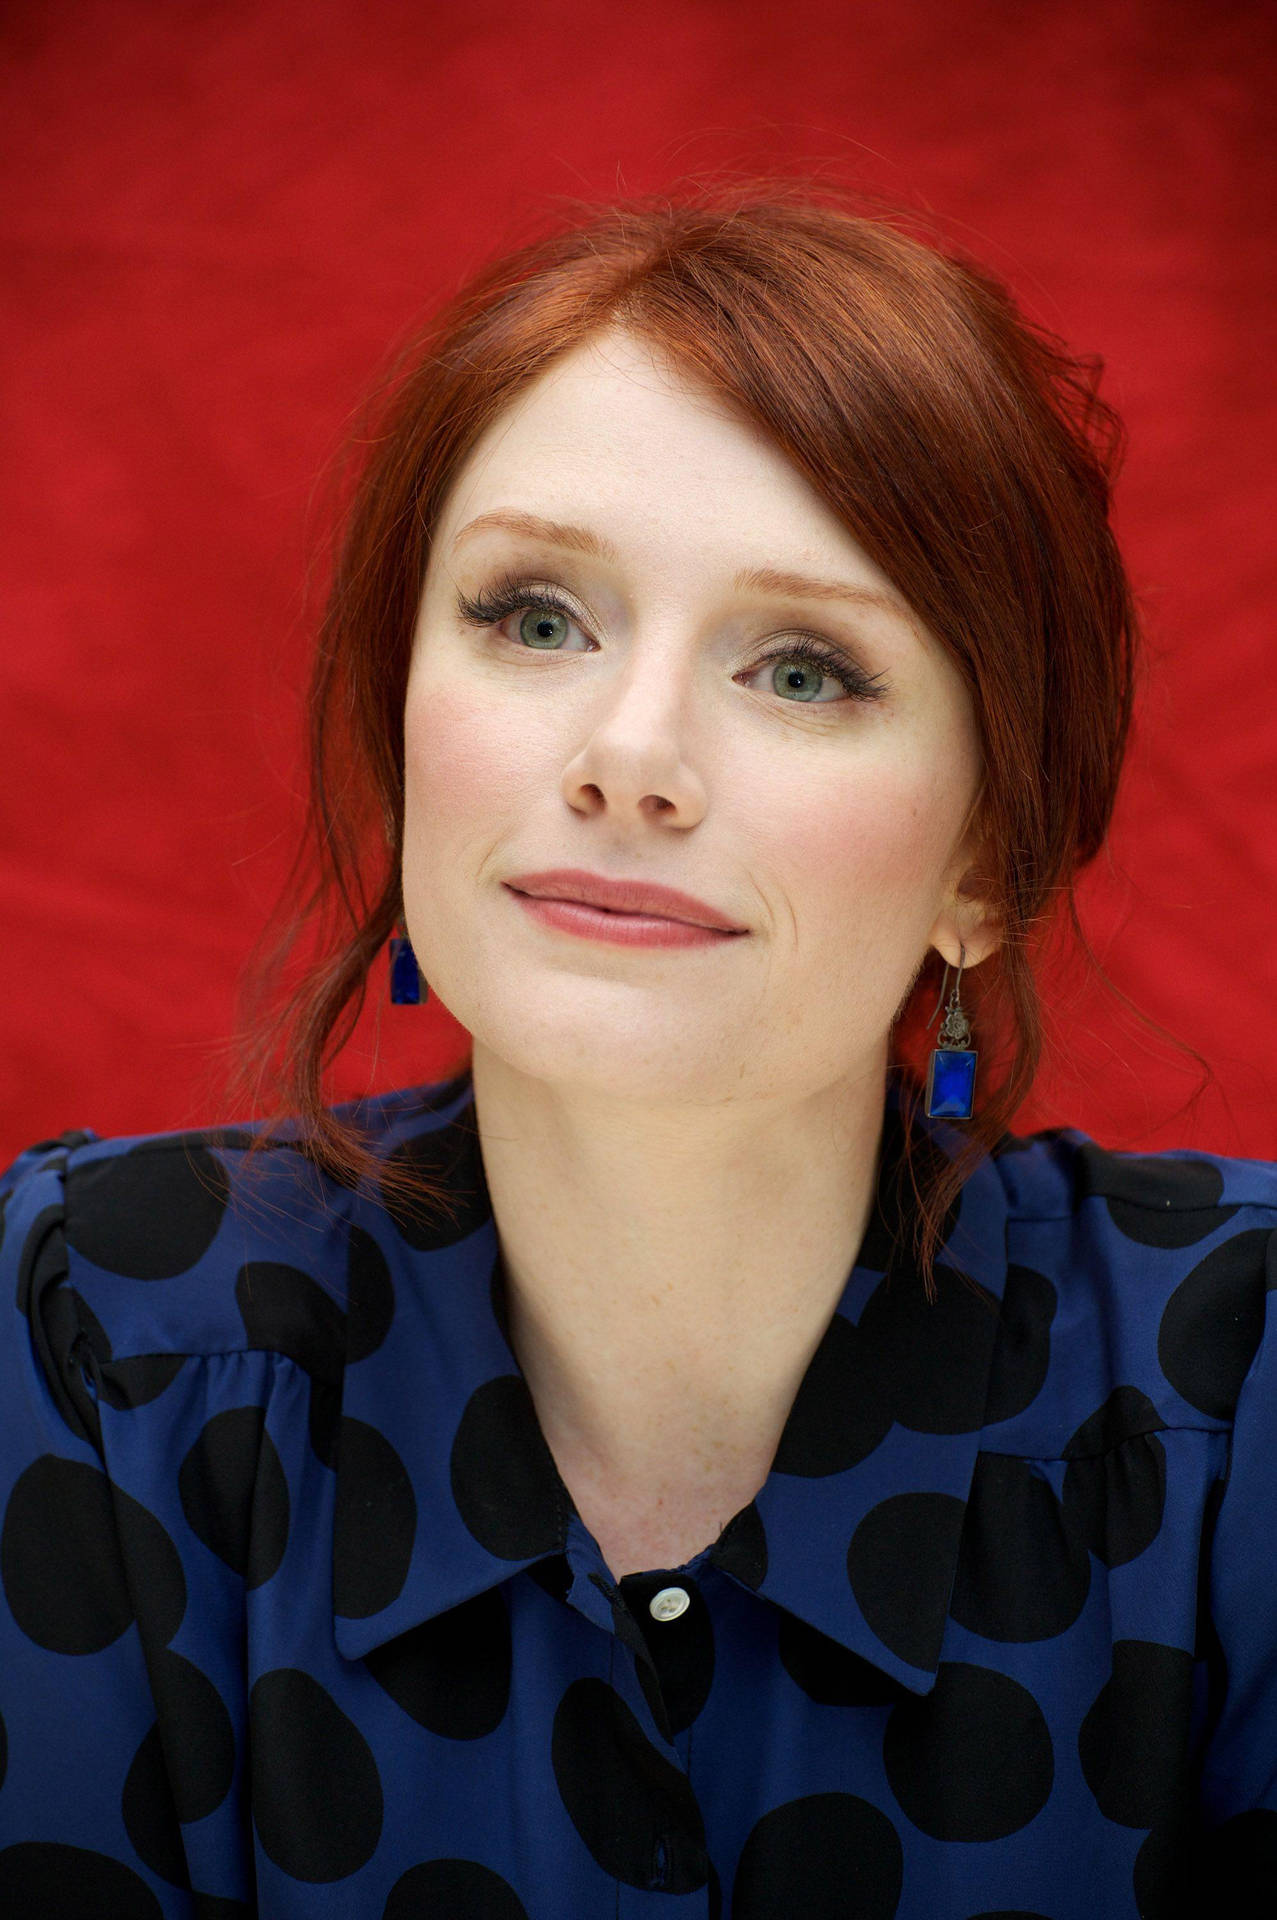 Bryce Dallas Howard In Blue Outfit On Red Background Wallpaper